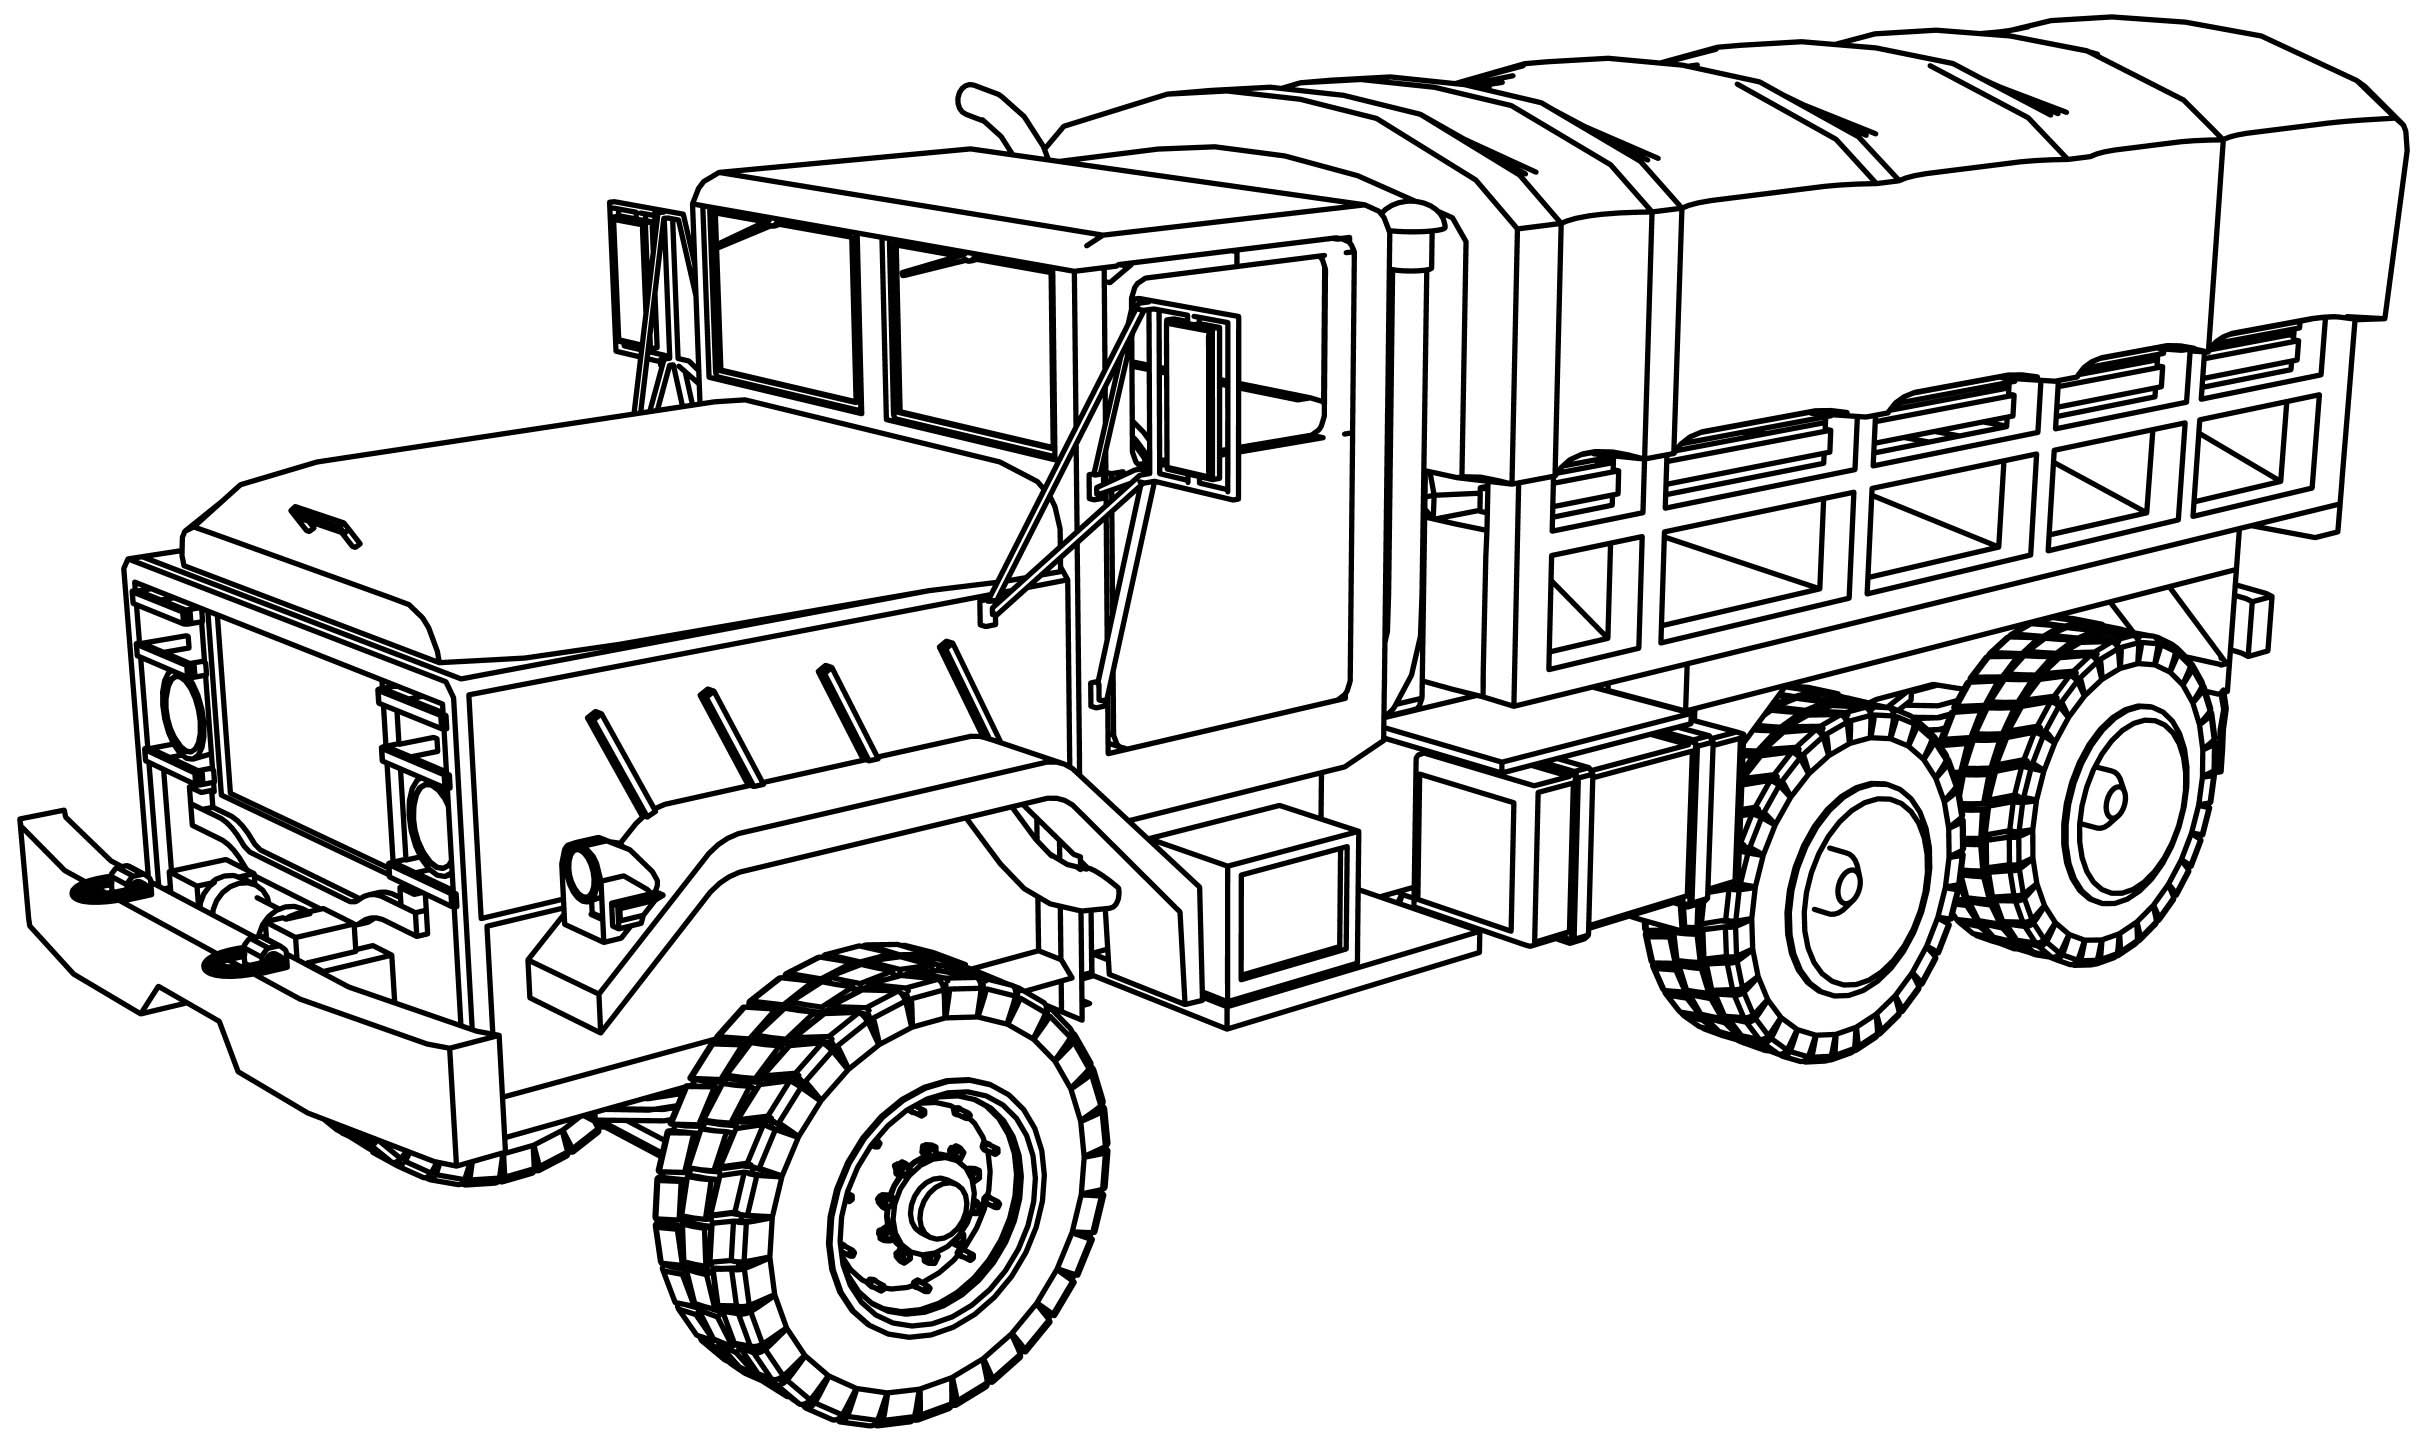 Printable Army Truck Coloring Pages Pdf - Free Printable Army Truck Coloring Pages